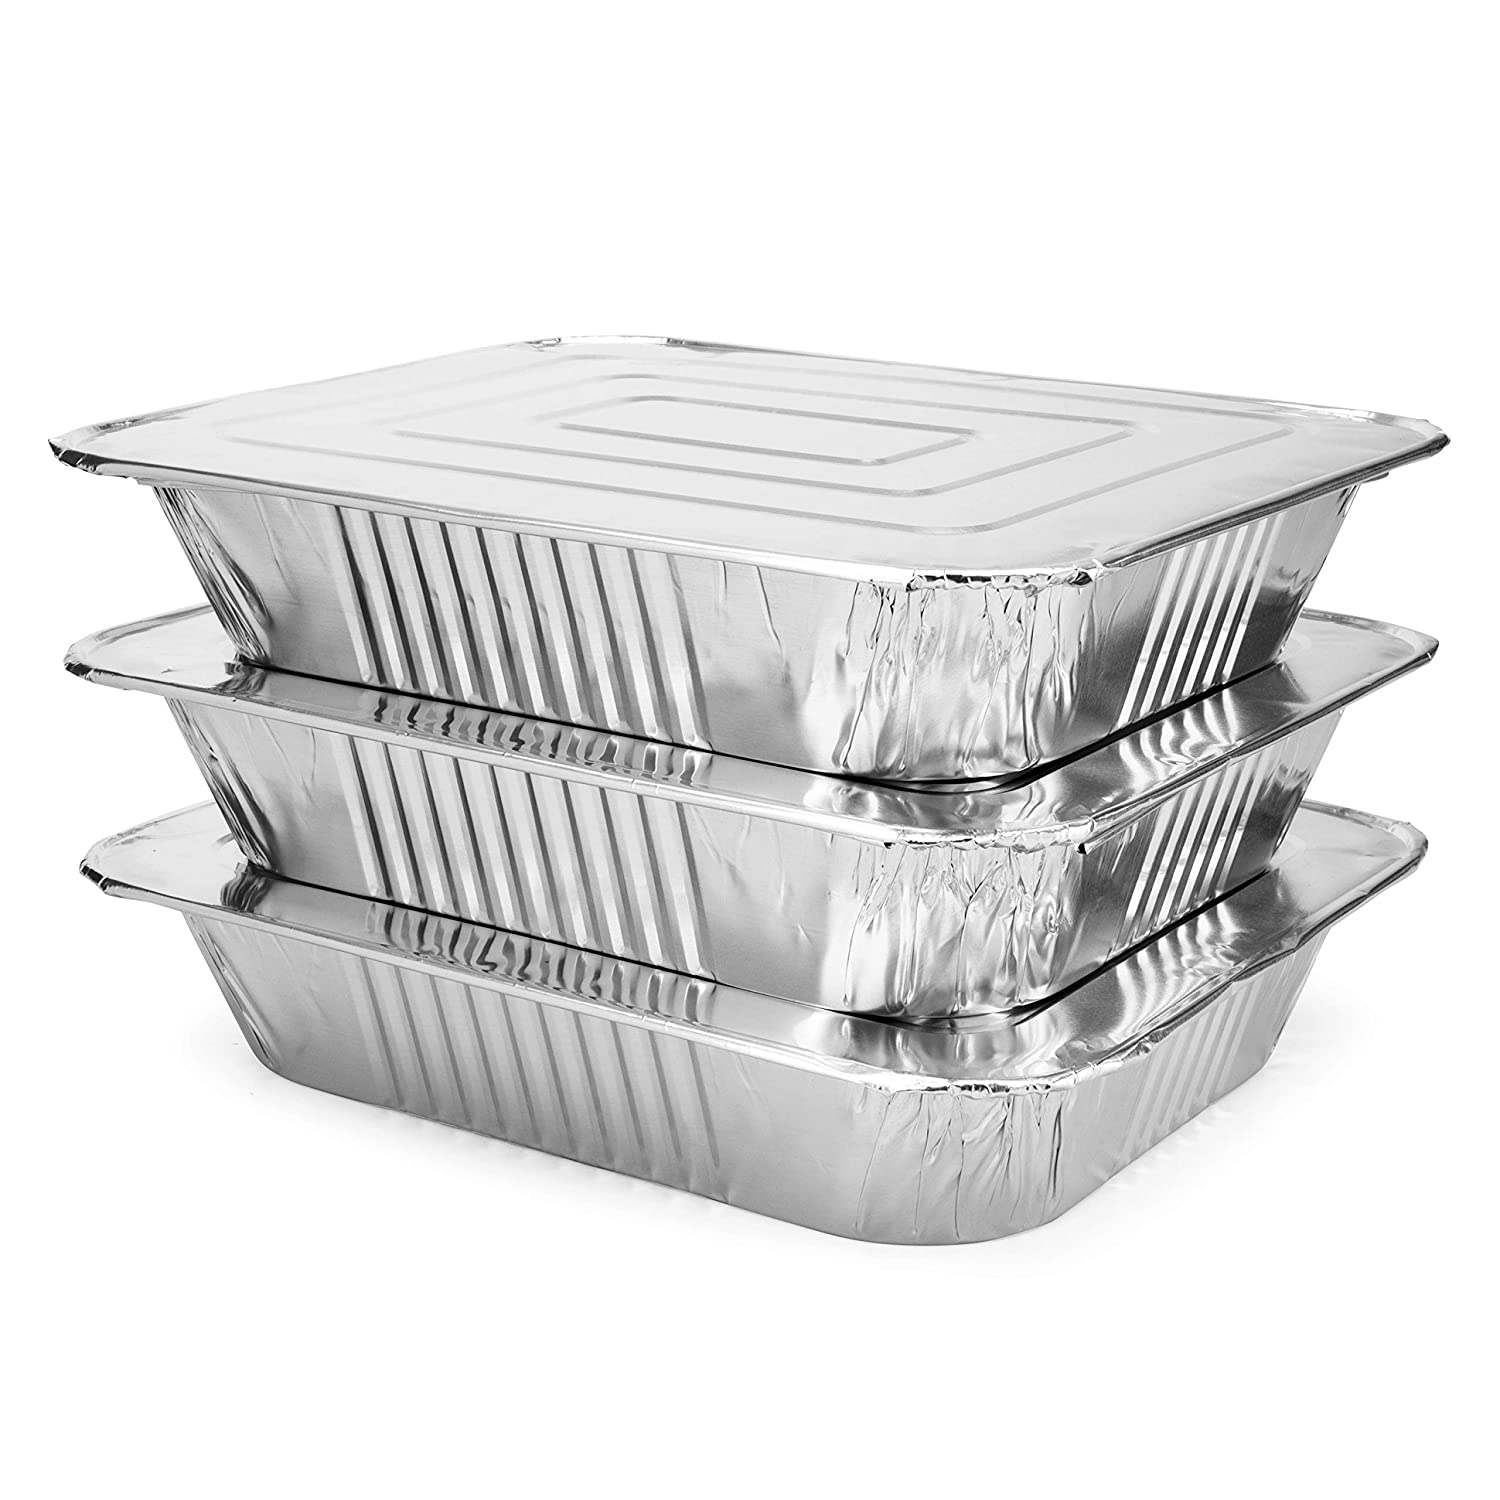 Pack Half Size Aluminum Pans with Lids, 9x13 Tin Food Trays for